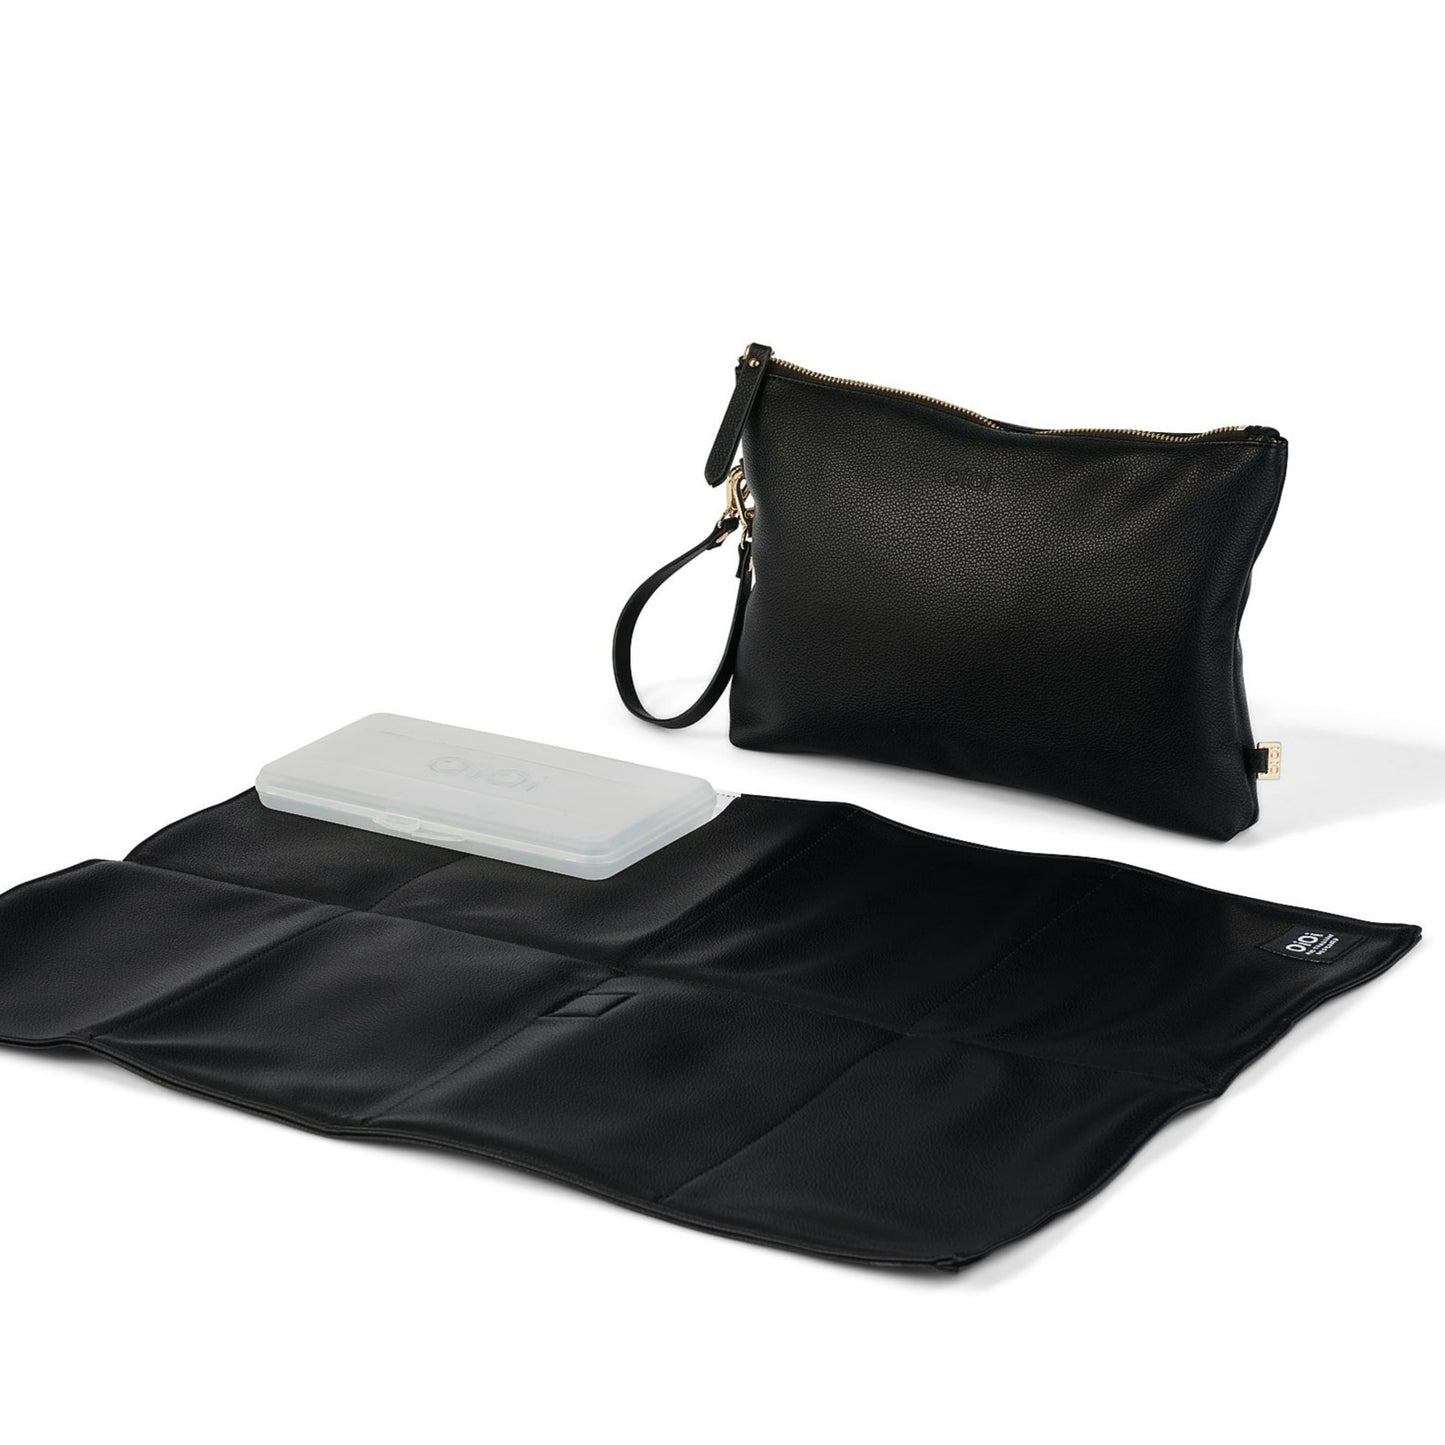 Diaper Changing Pouch - Black Vegan Leather